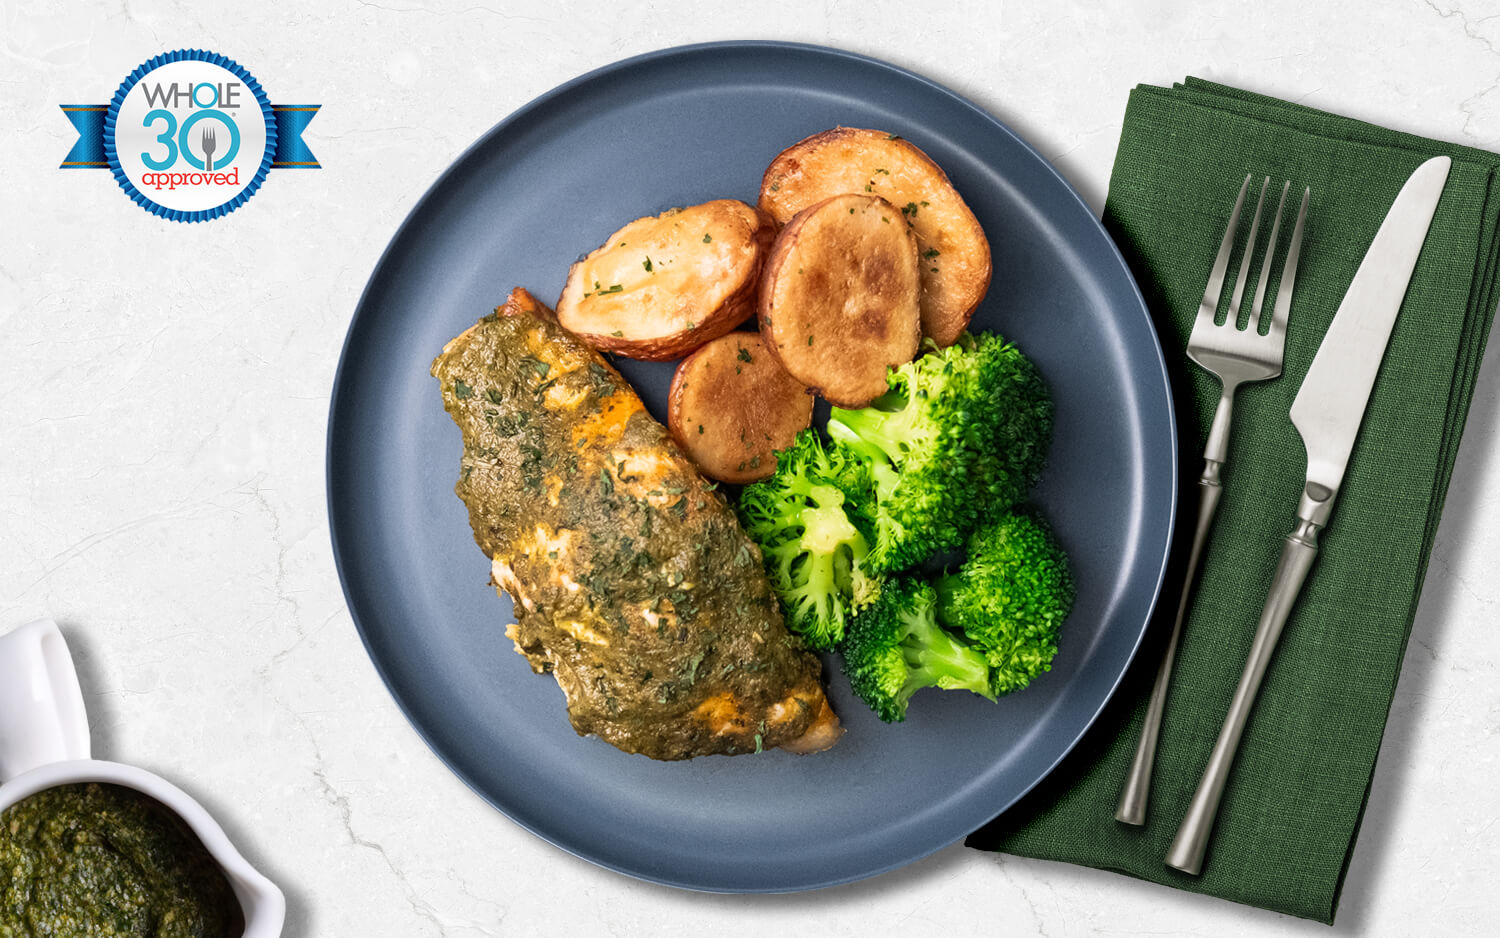 Salmon topped with pesto sauce, served with red skin potatoes and broccoli